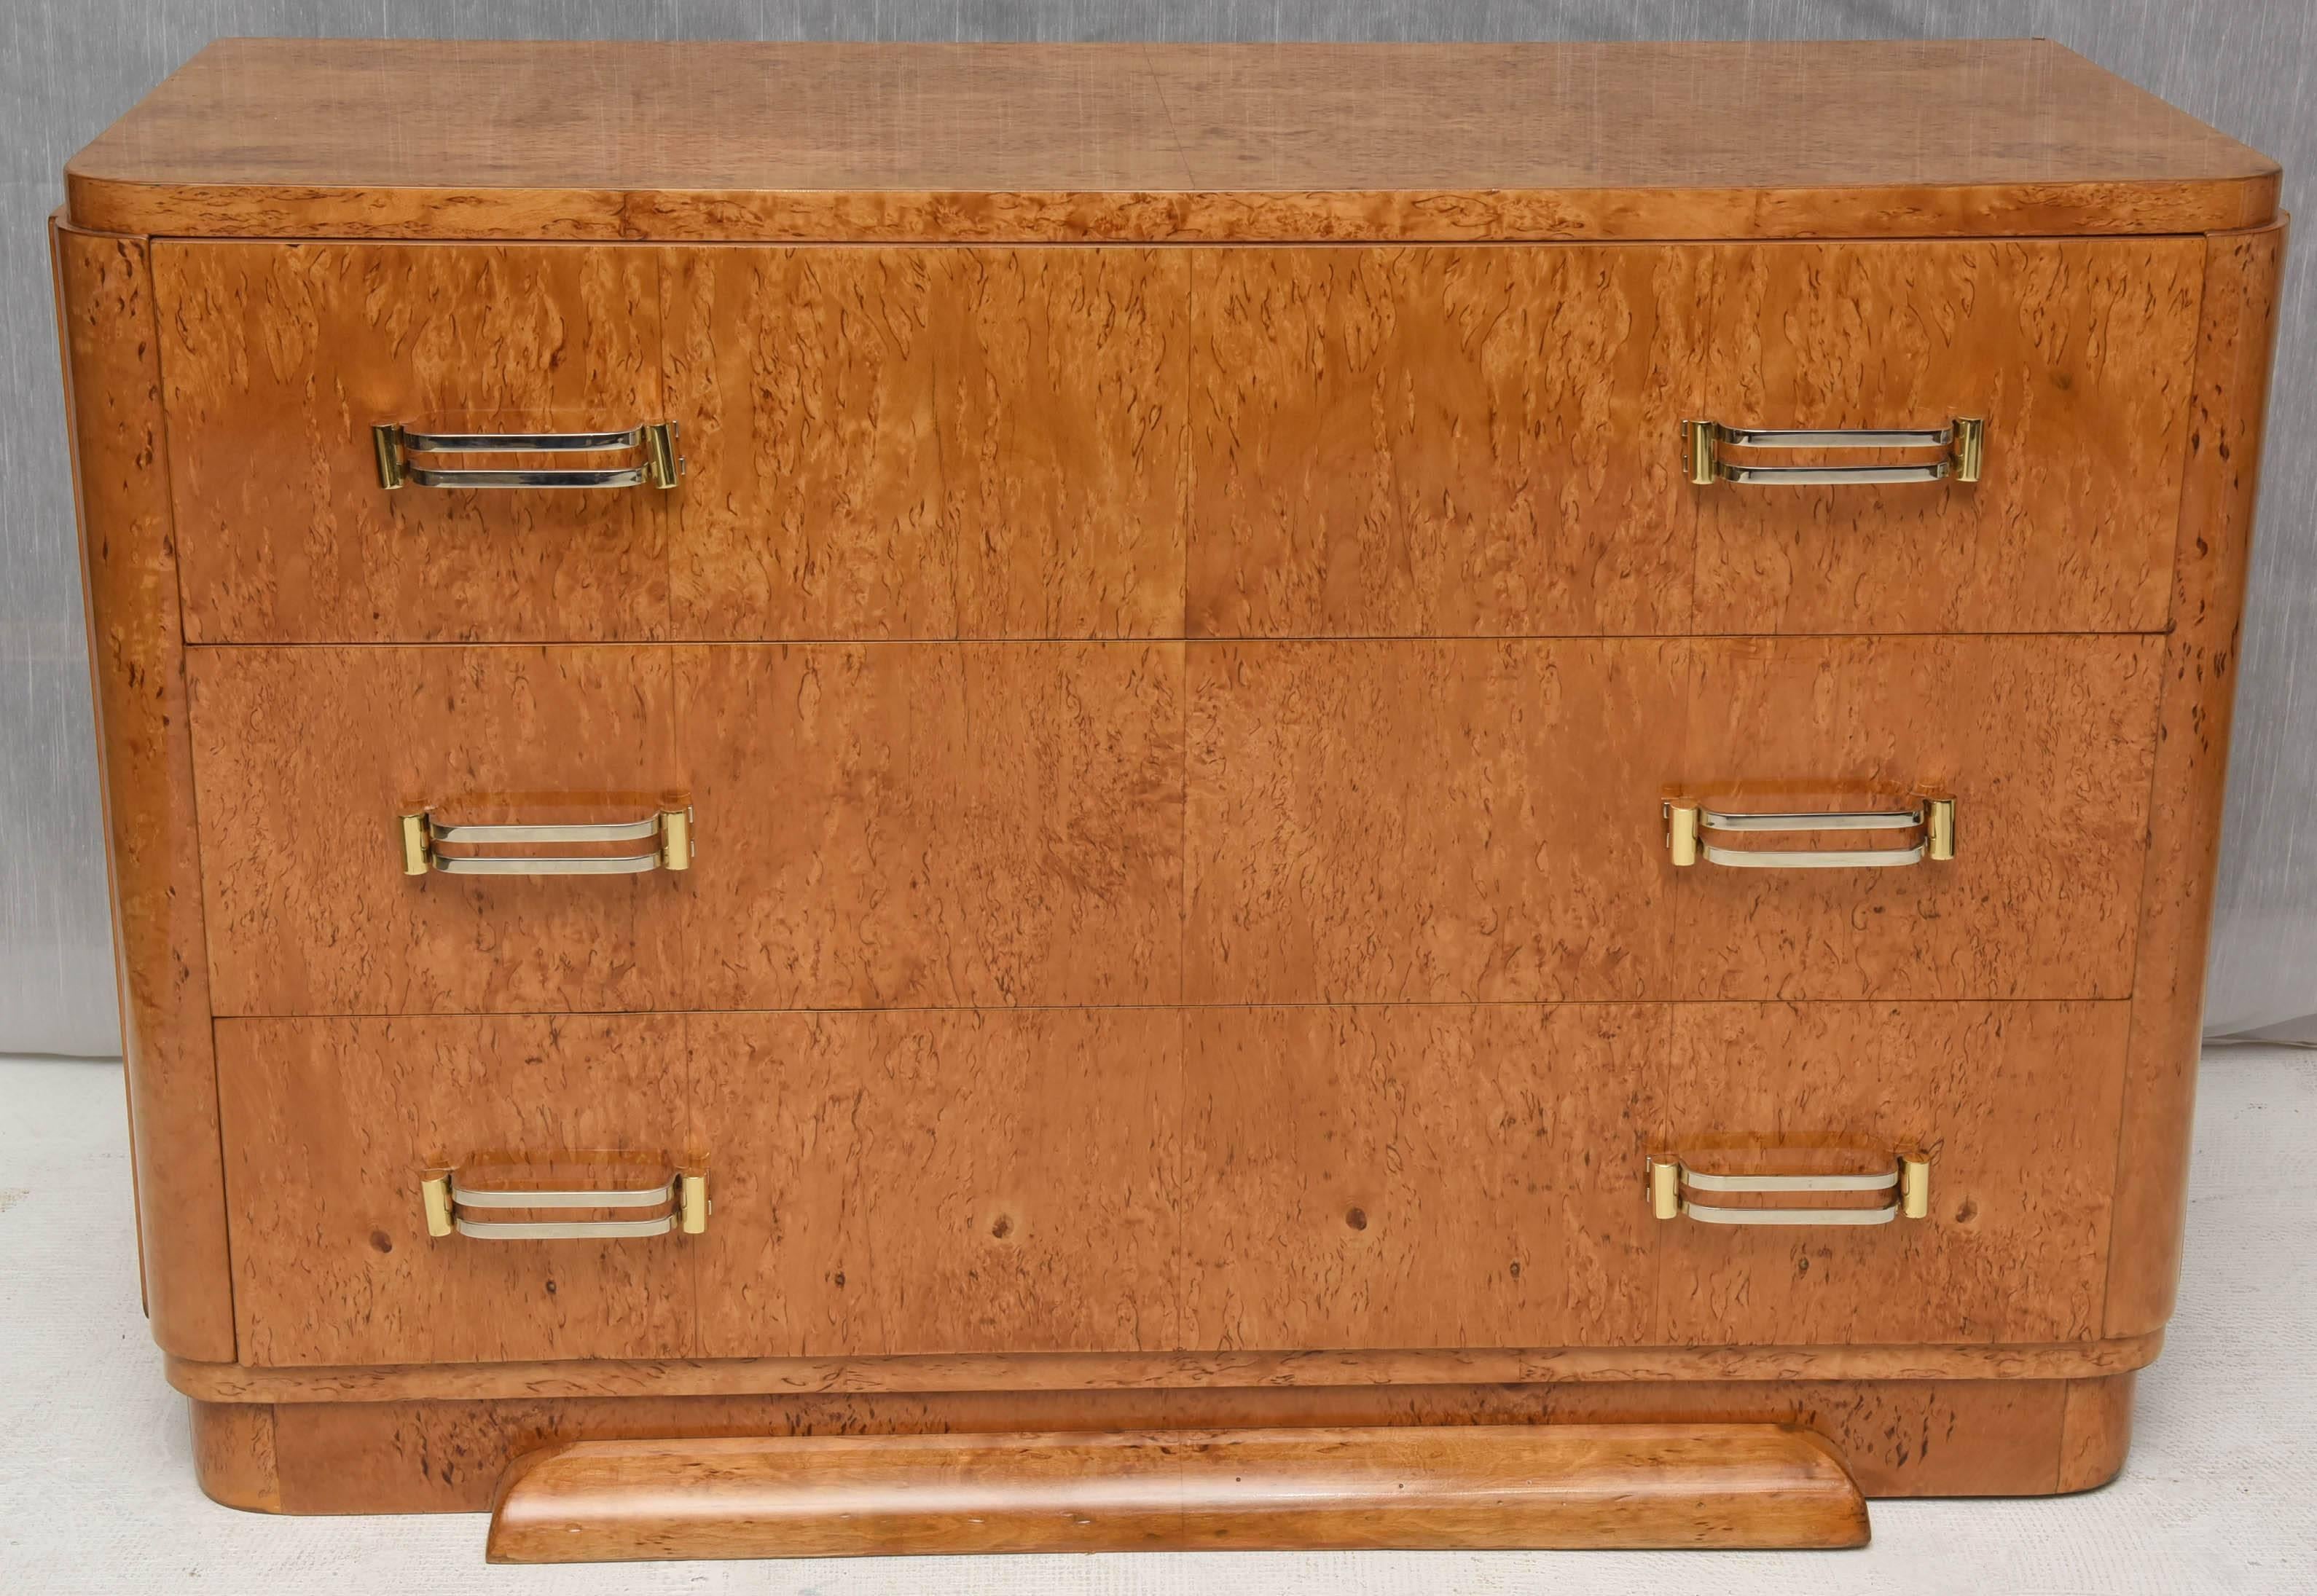 Unusual chest of drawers, 
elegant three drawers commode, 
French Art Deco piece  in light b url of Amboina.
The hardwares are elaborated made of two colors metals. The size and the proportions are perfect.